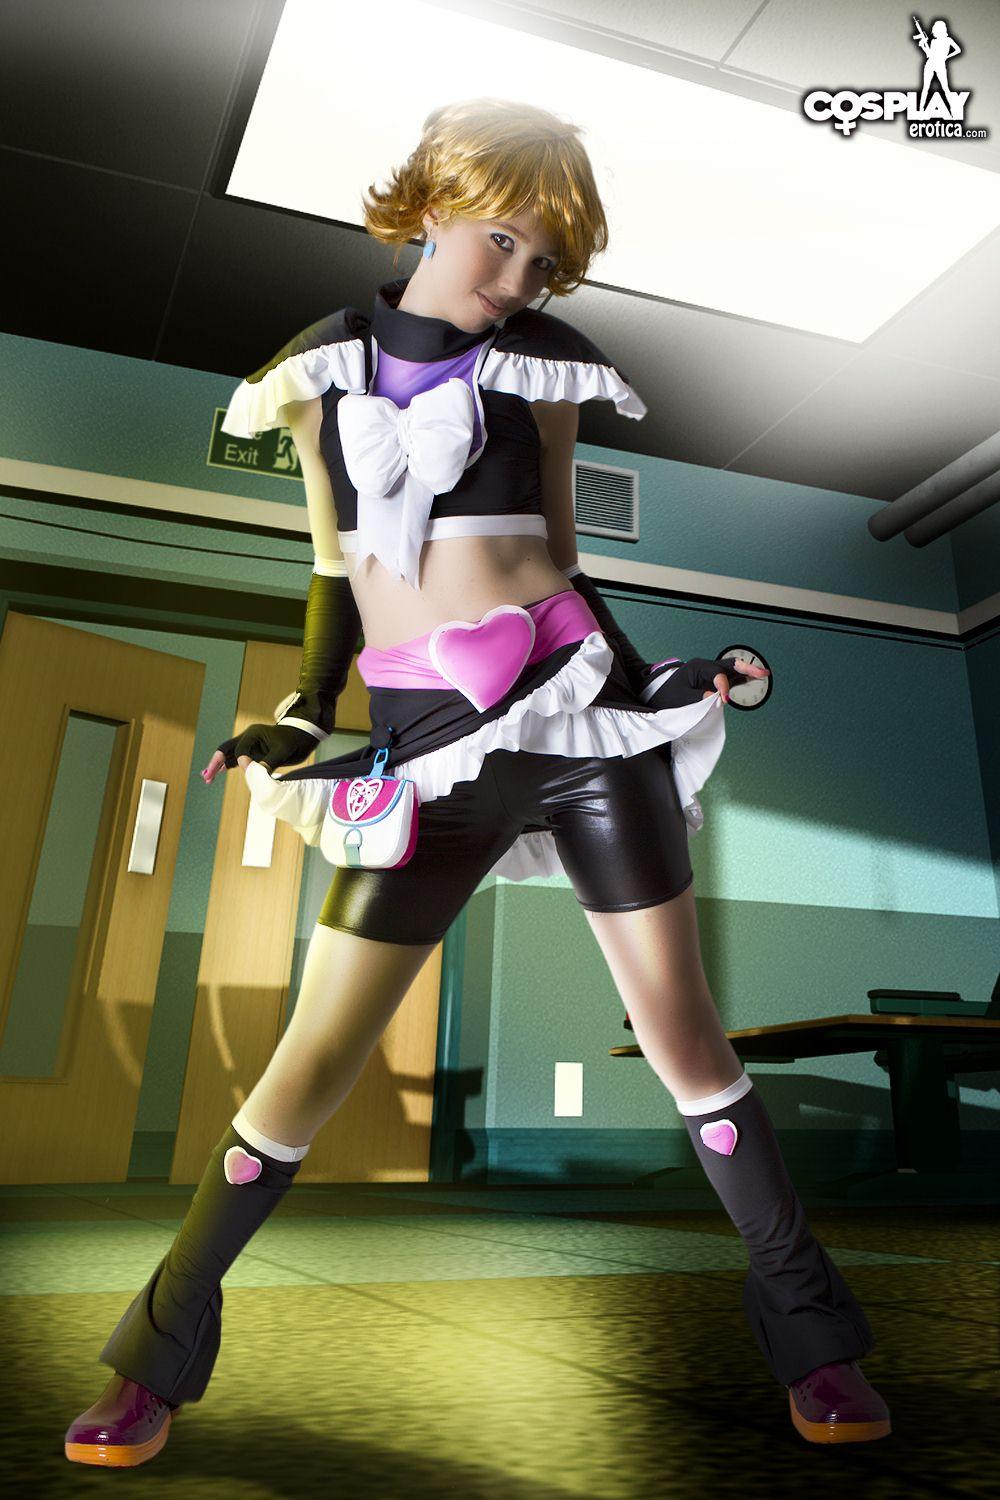 Sexy cosplayer Stacey gives some hot Pretty Cure anime fantasy #60007733